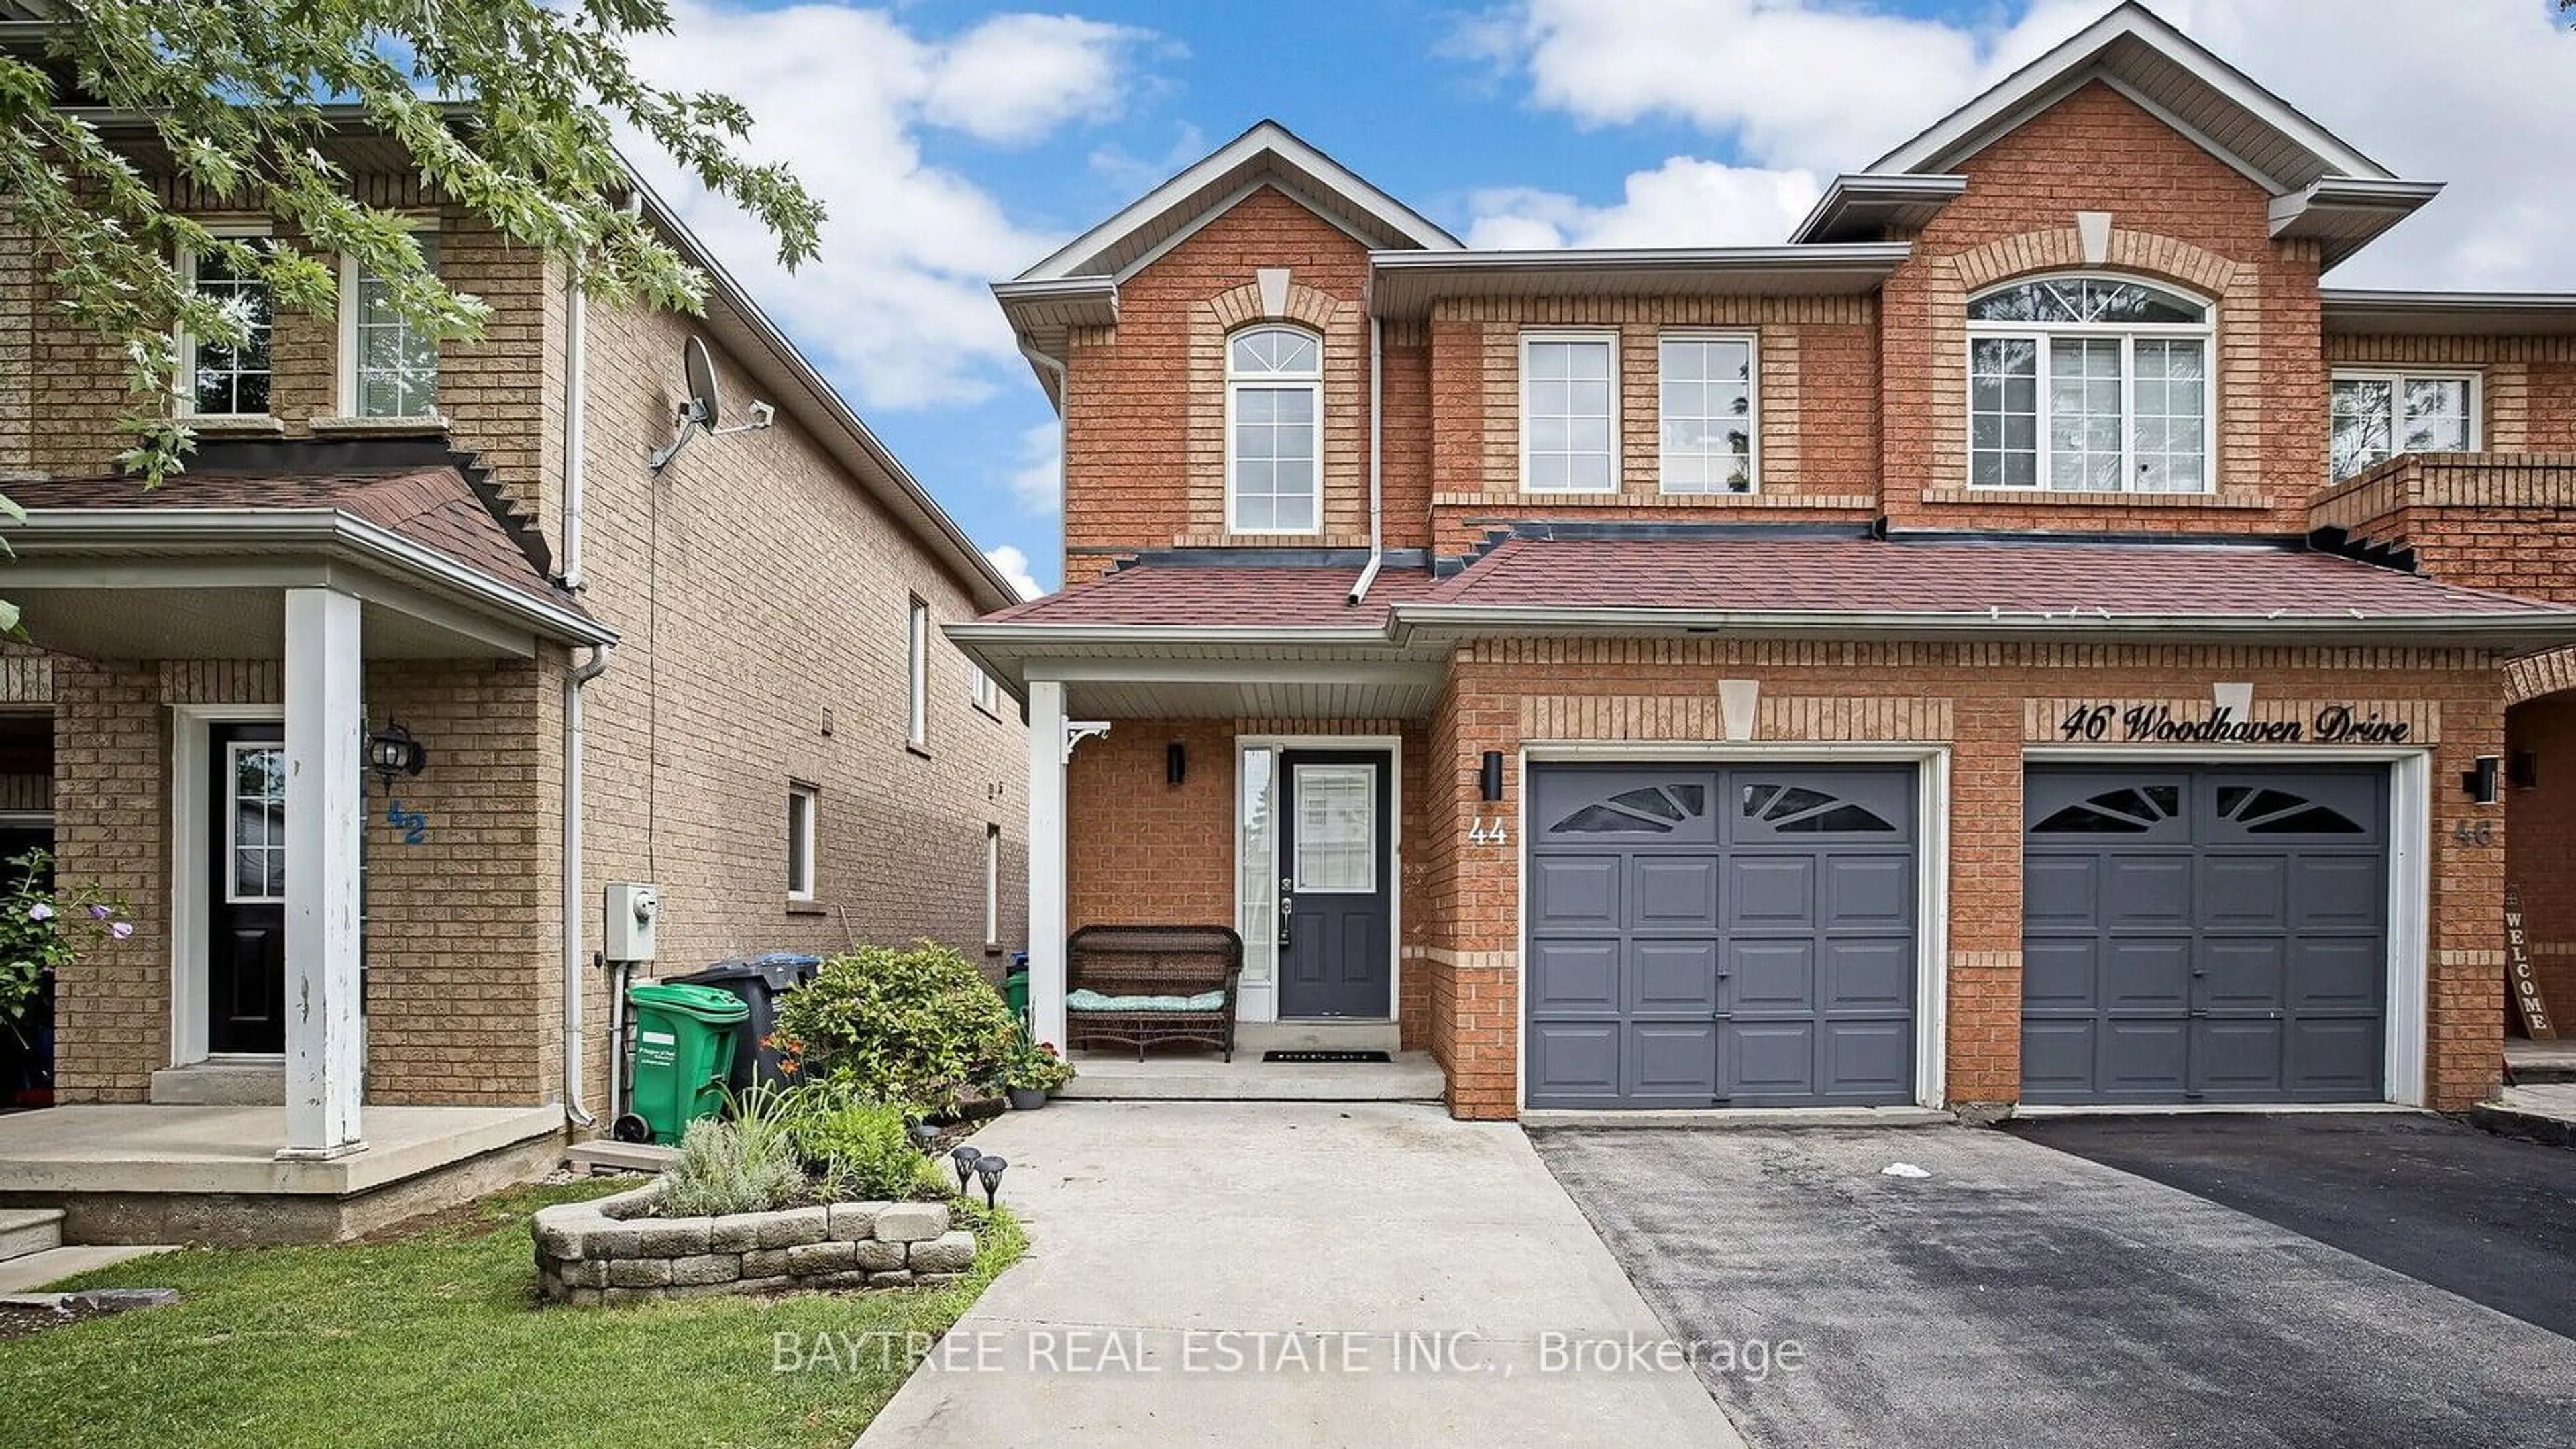 Home with brick exterior material for 44 Woodhaven Dr, Brampton Ontario L7A 1Y8